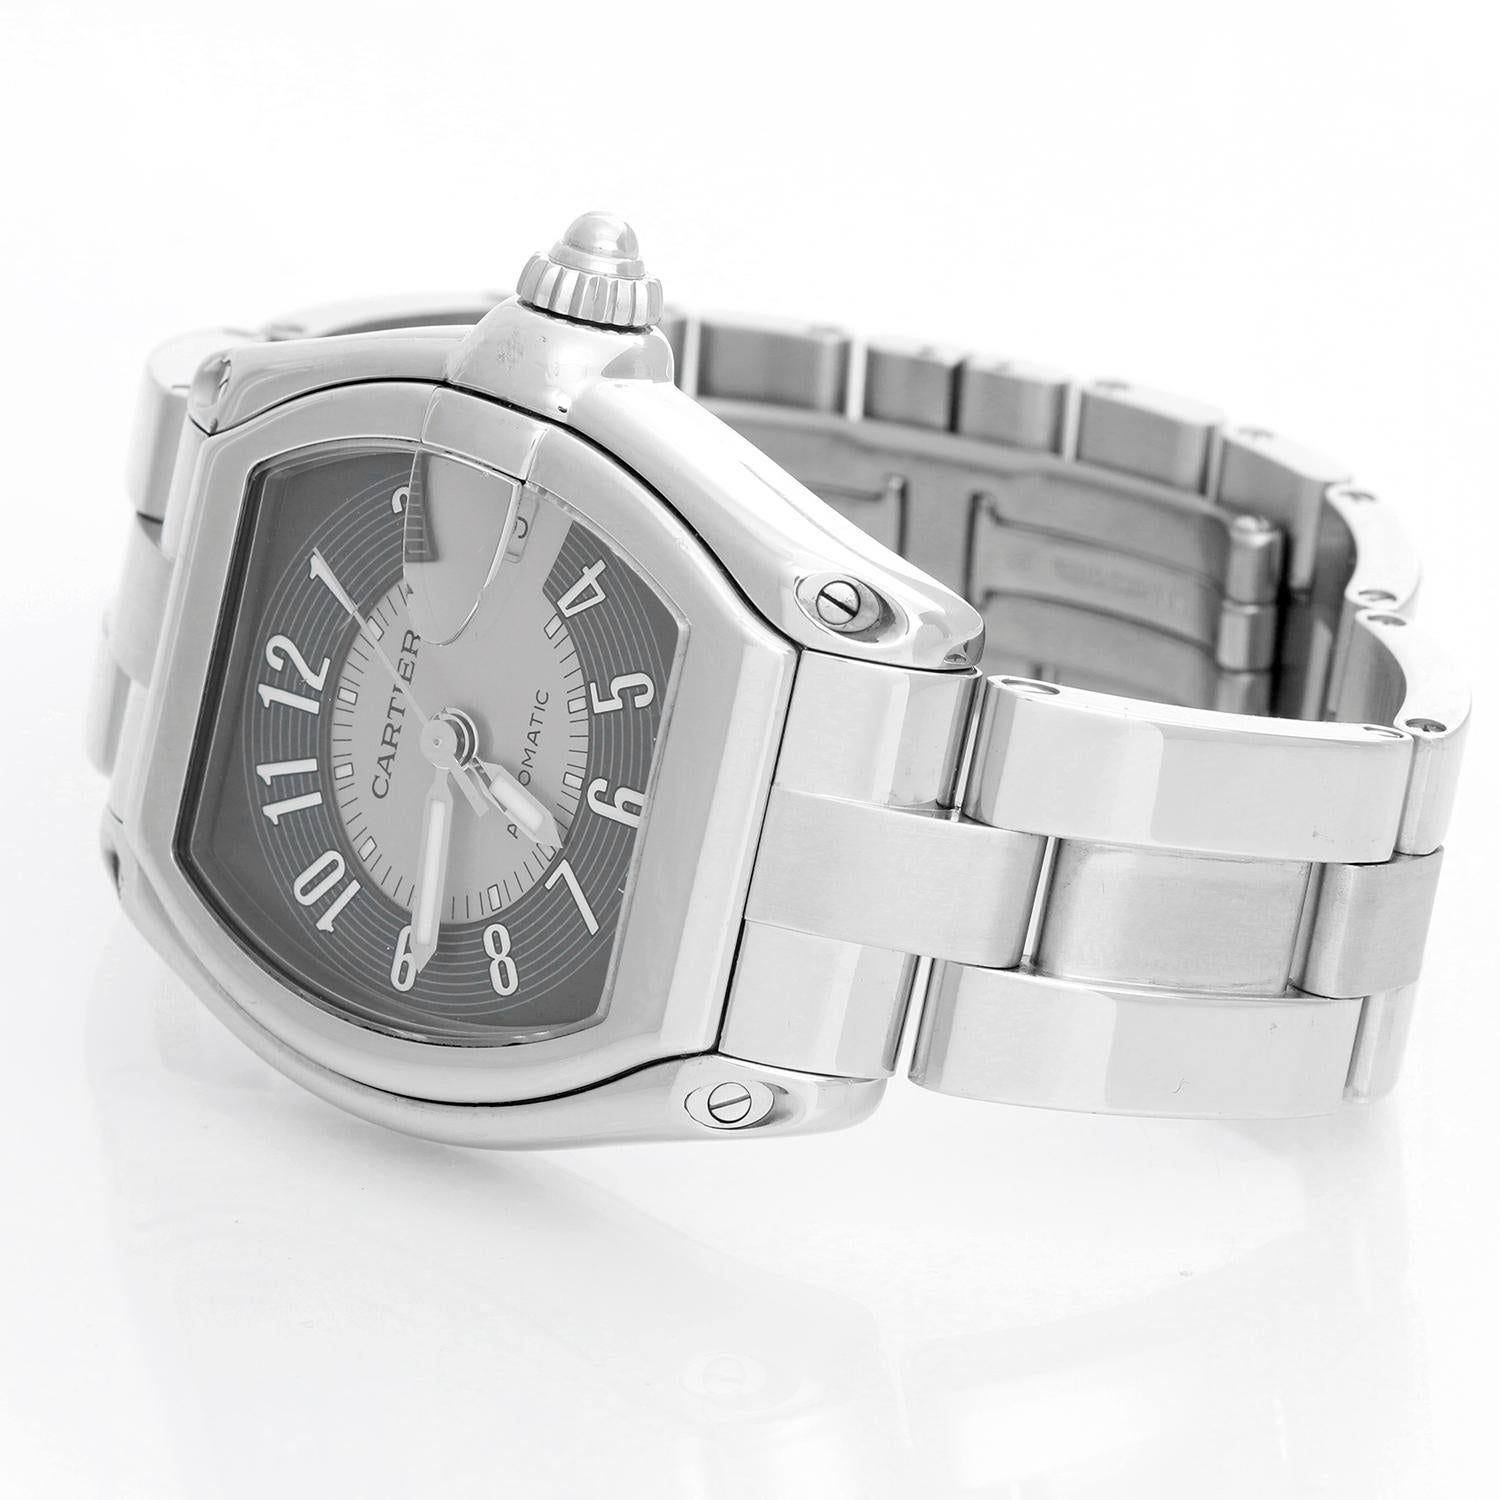 Cartier Roadster Men's Stainless Steel Automatic Watch  W62002V3 - Automatic winding. Stainless steel case  (38mm x 44mm). Gray dial with Arabic numerals; date at 3 o'clock. Stainless steel Cartier Roadster bracelet with deployant clasp. Pre-owned